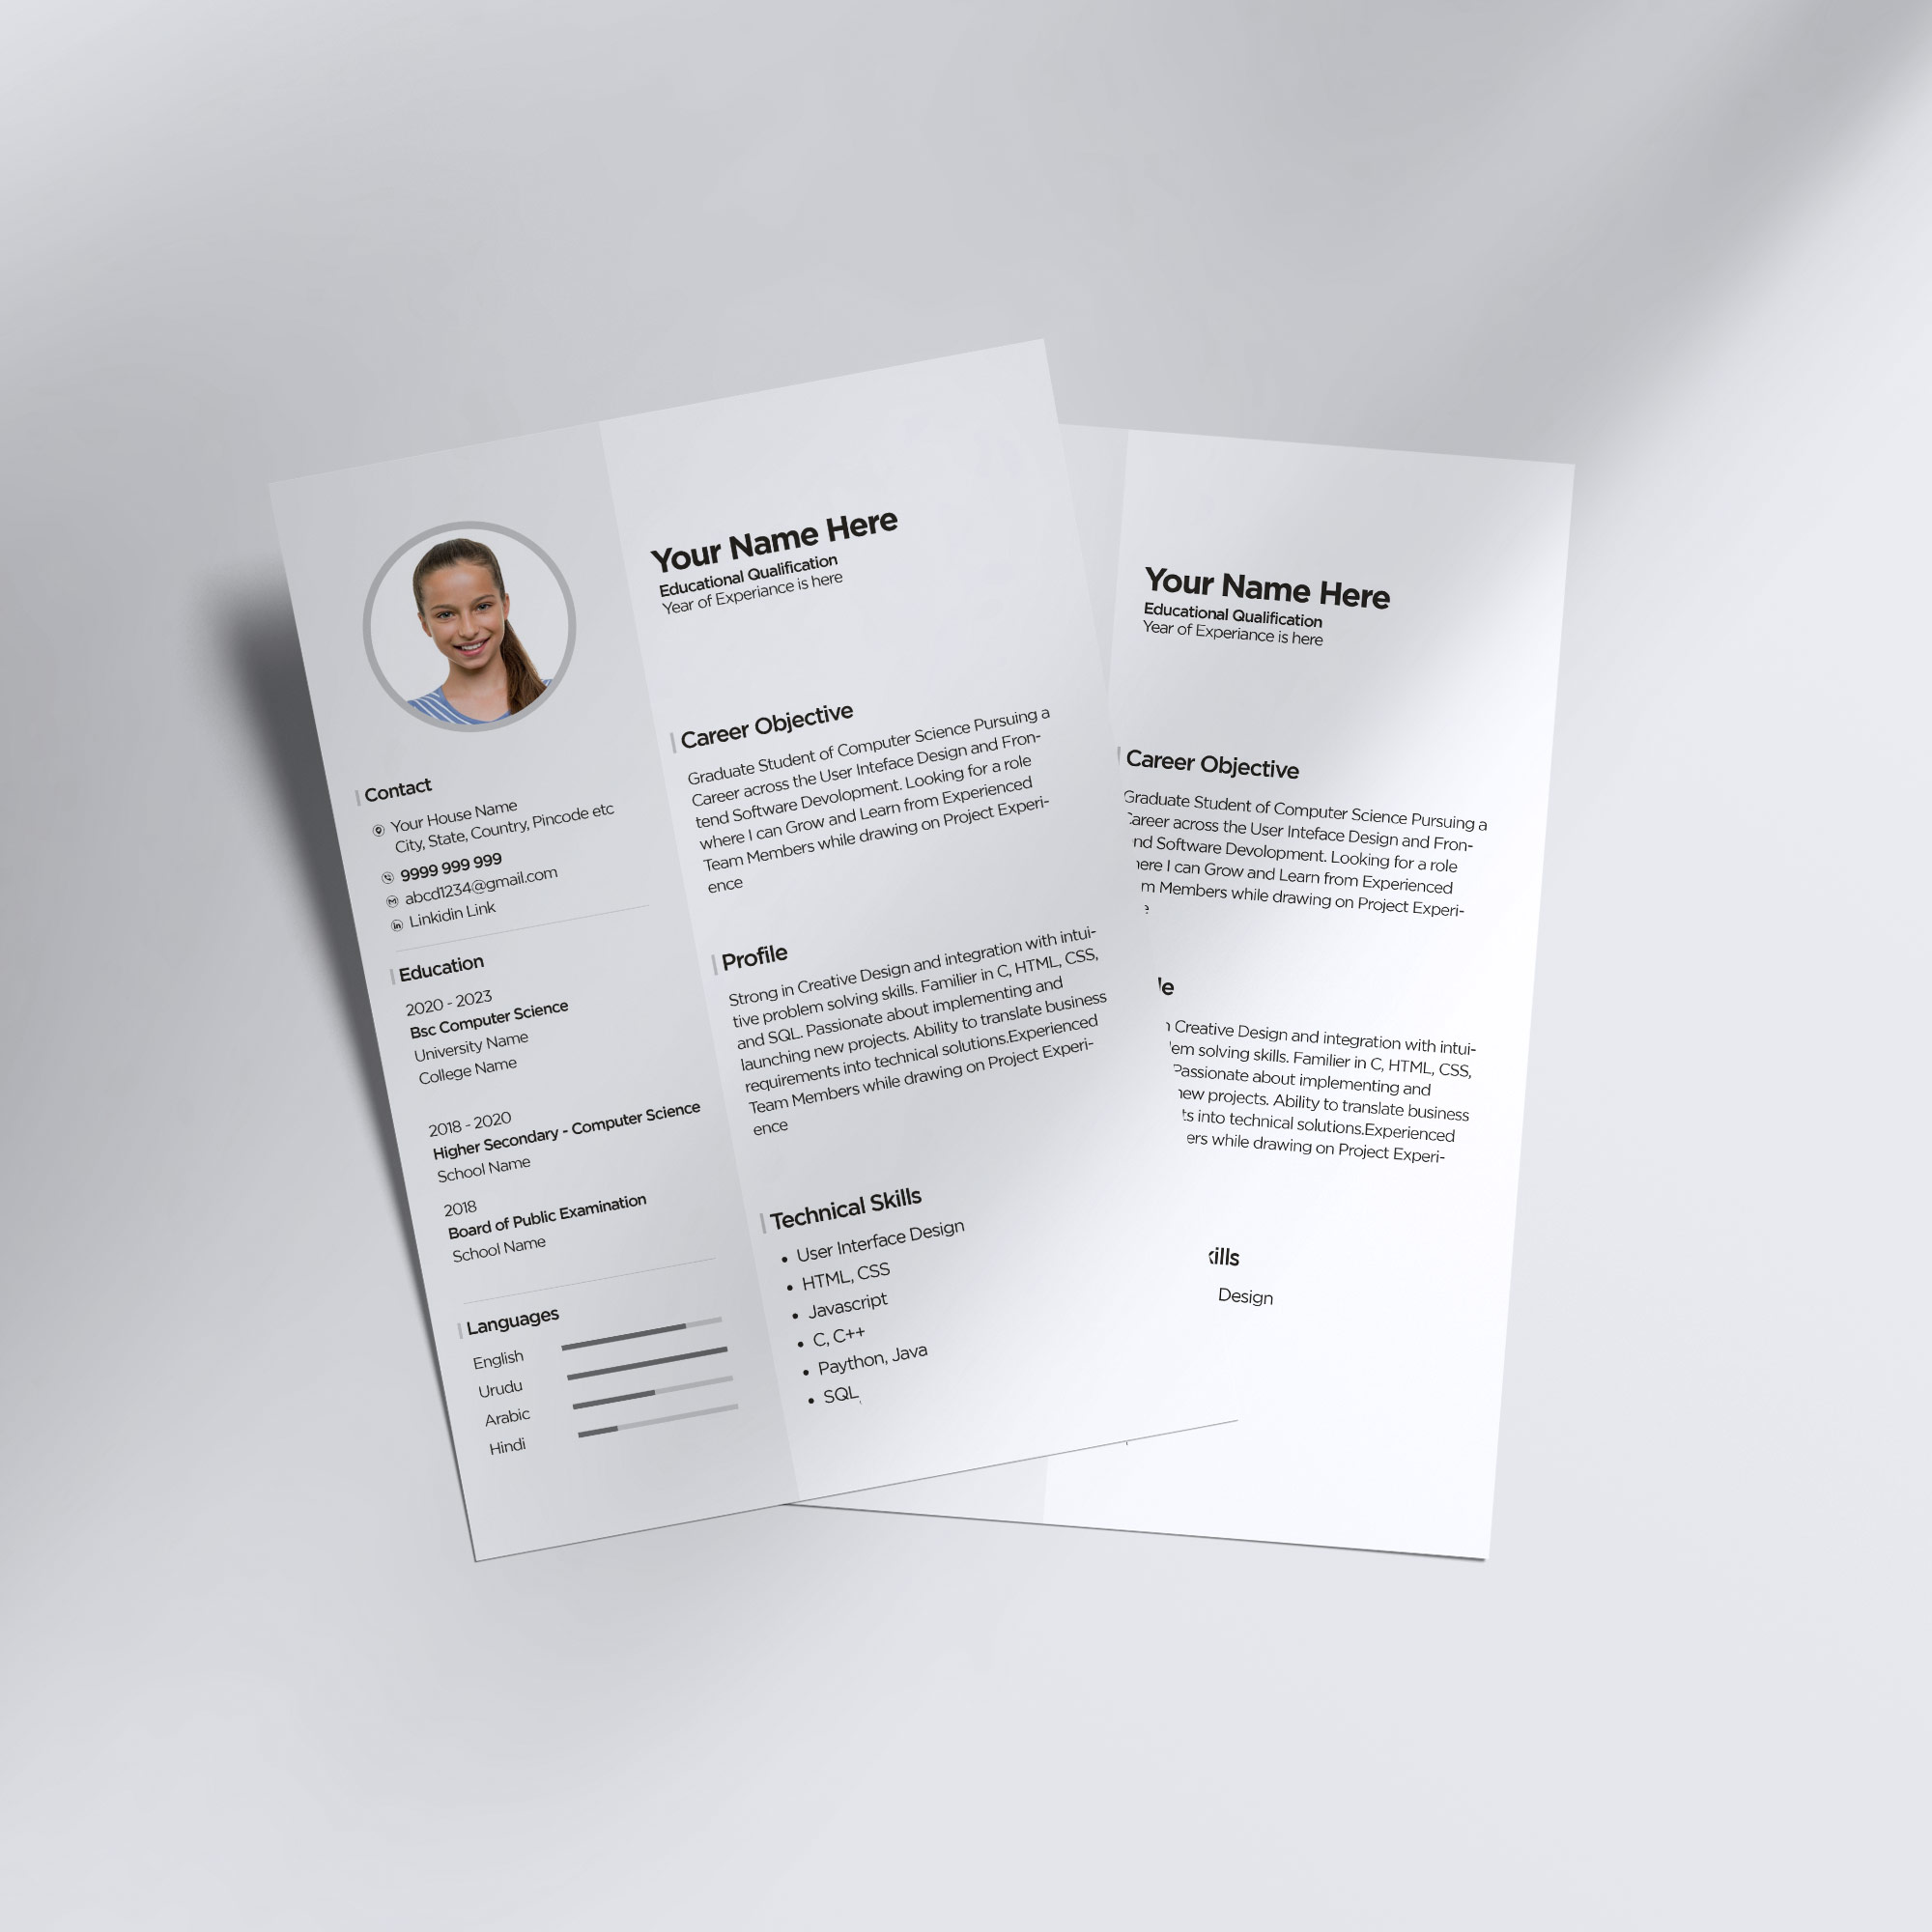 Two resume templates on top of each other.